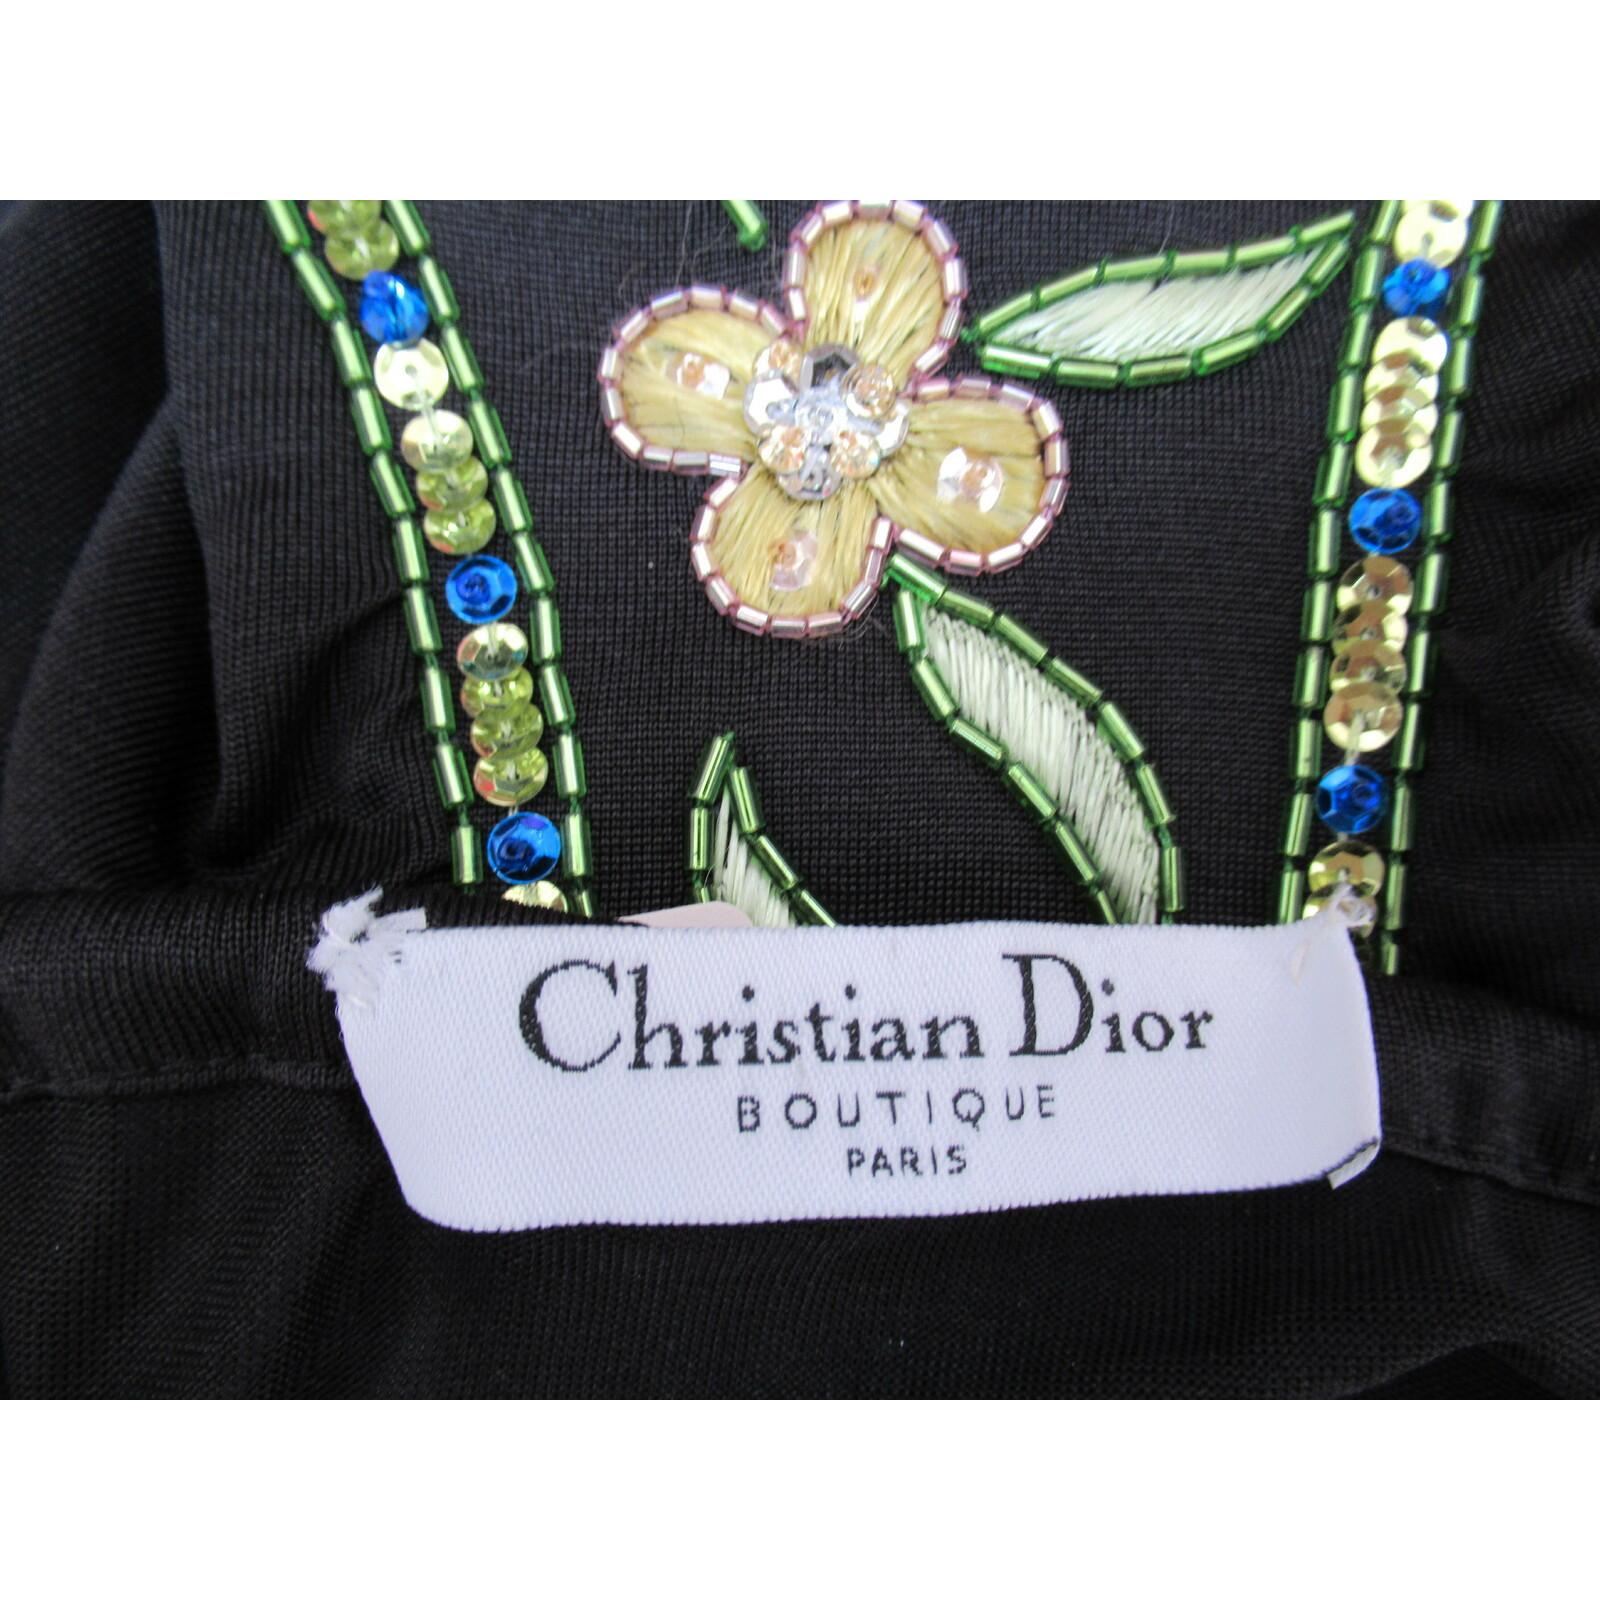 S/S 02 Look#37 Vintage John Galliano for Christian Dior Embellished Silk Dress  1